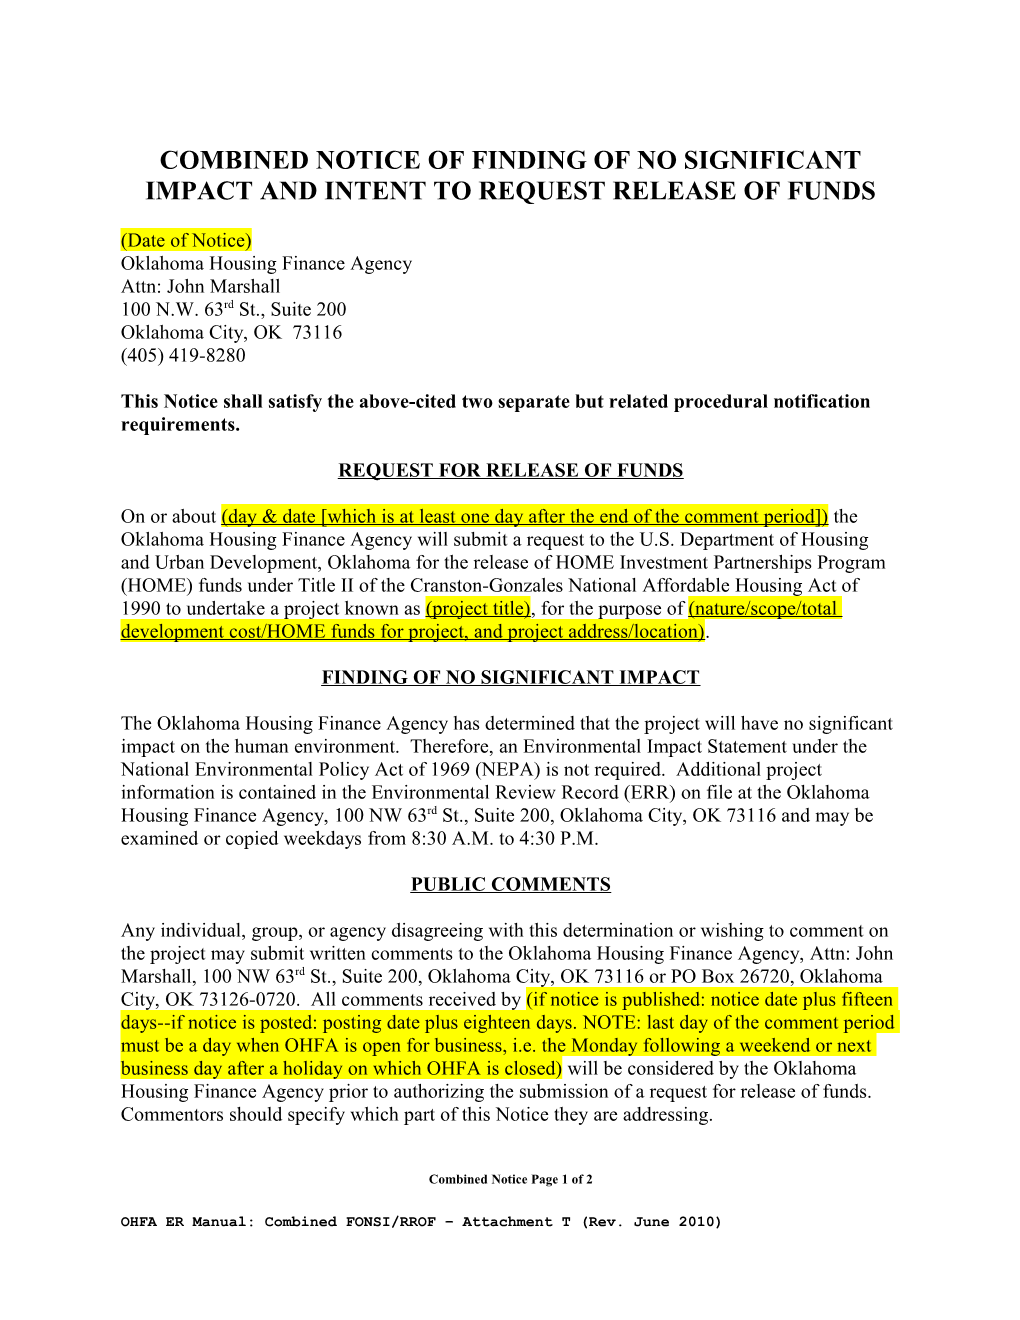 Combined Notice of Finding of No Significant Impact and Intent to Request Release of Funds